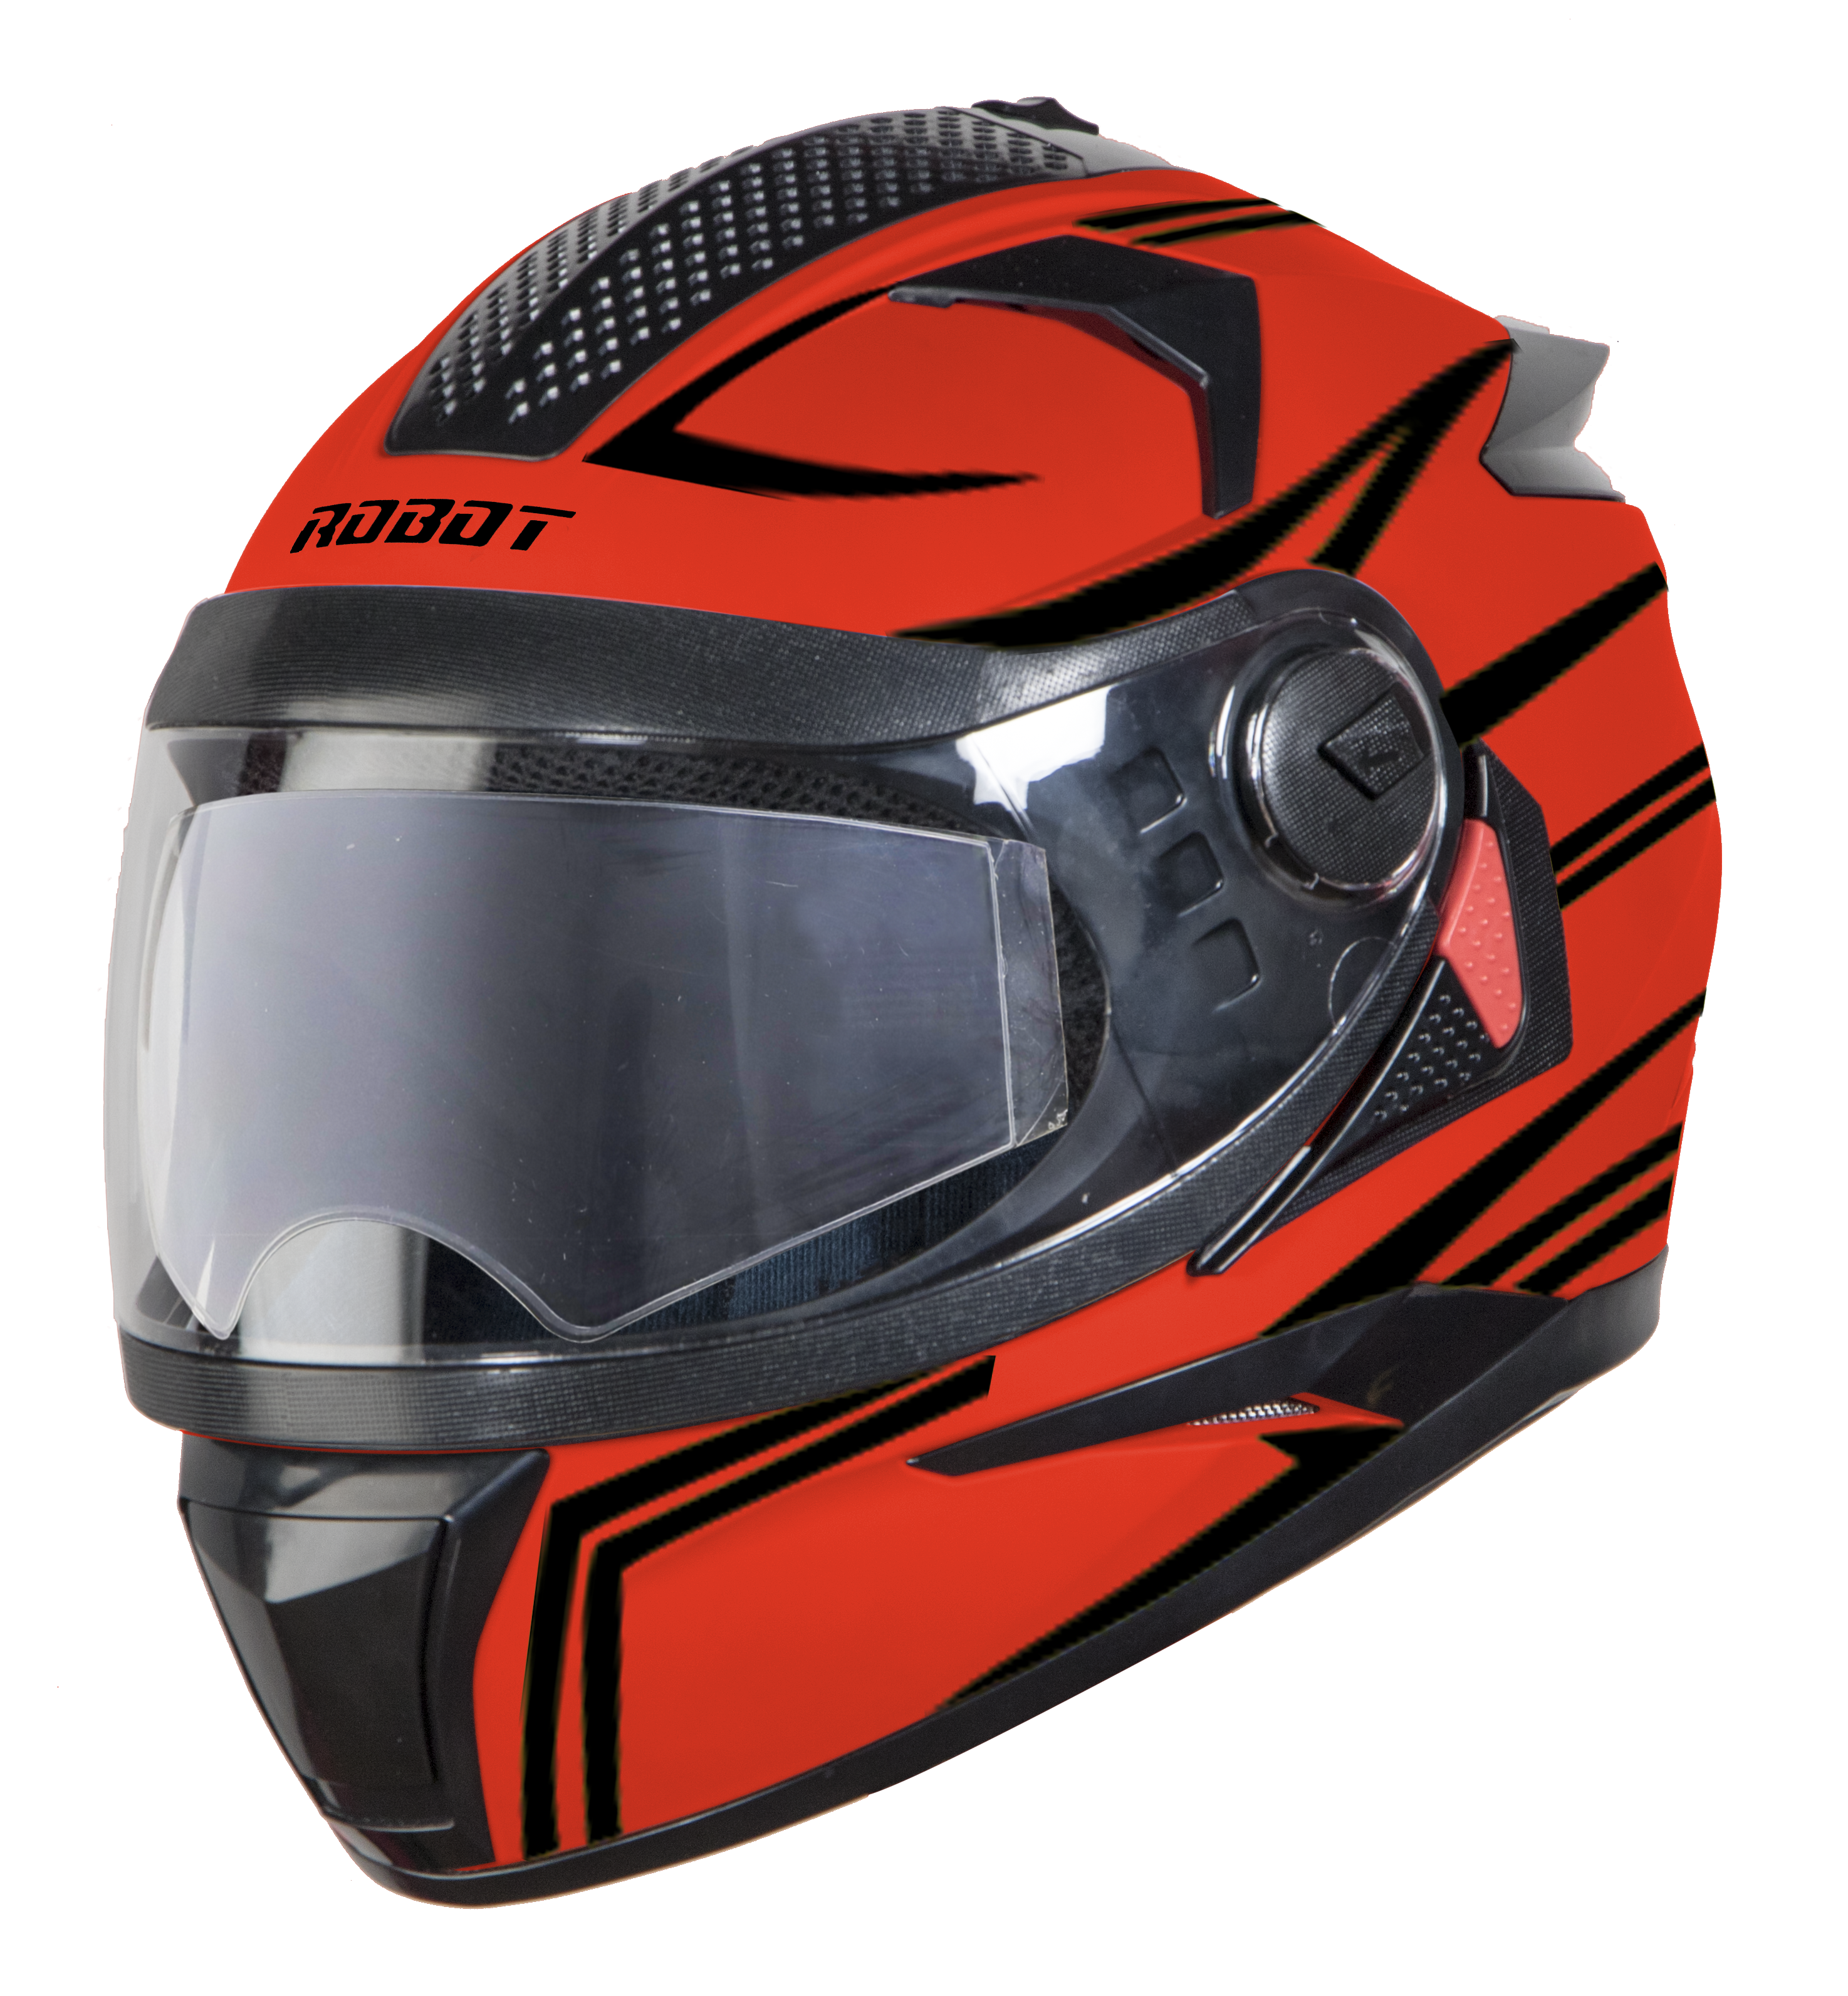 SBH-17 ROBOT REFLECTIVE GLOSSY FLUO RED (WITH ANTI-FOG SHIELD)